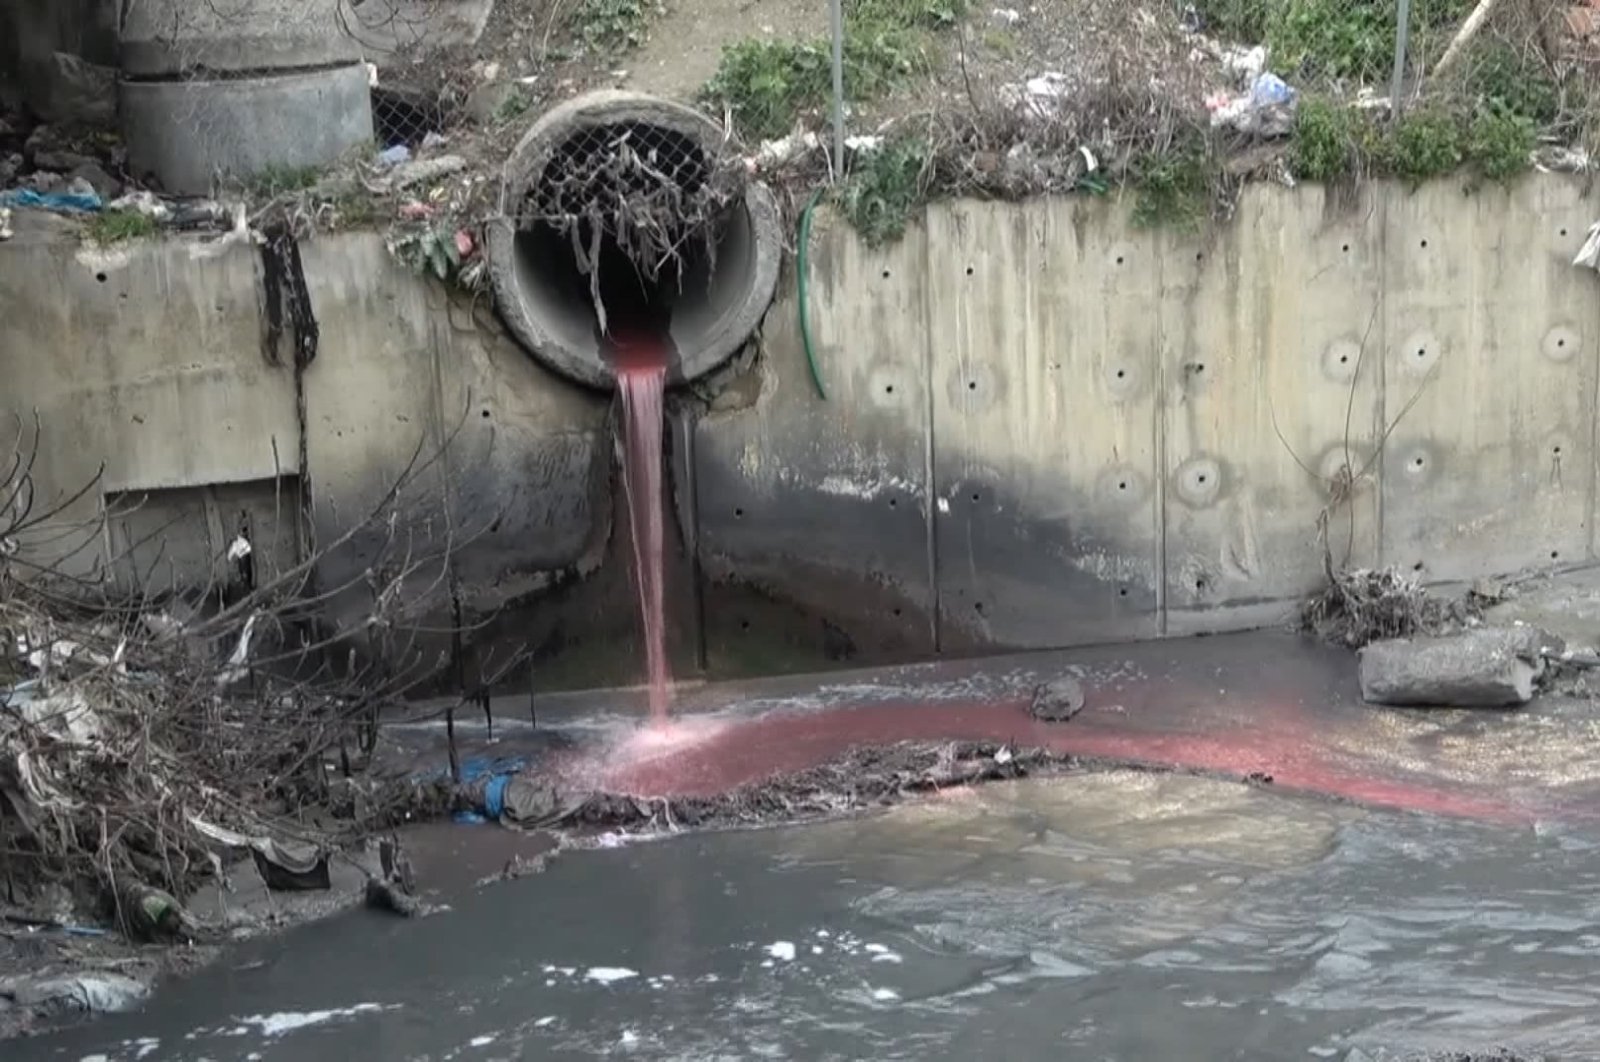 Pink water pours into Haramidere creek in Esenyurt district, Istanbul, Turkey, March 20, 2021. (DHA Photo)